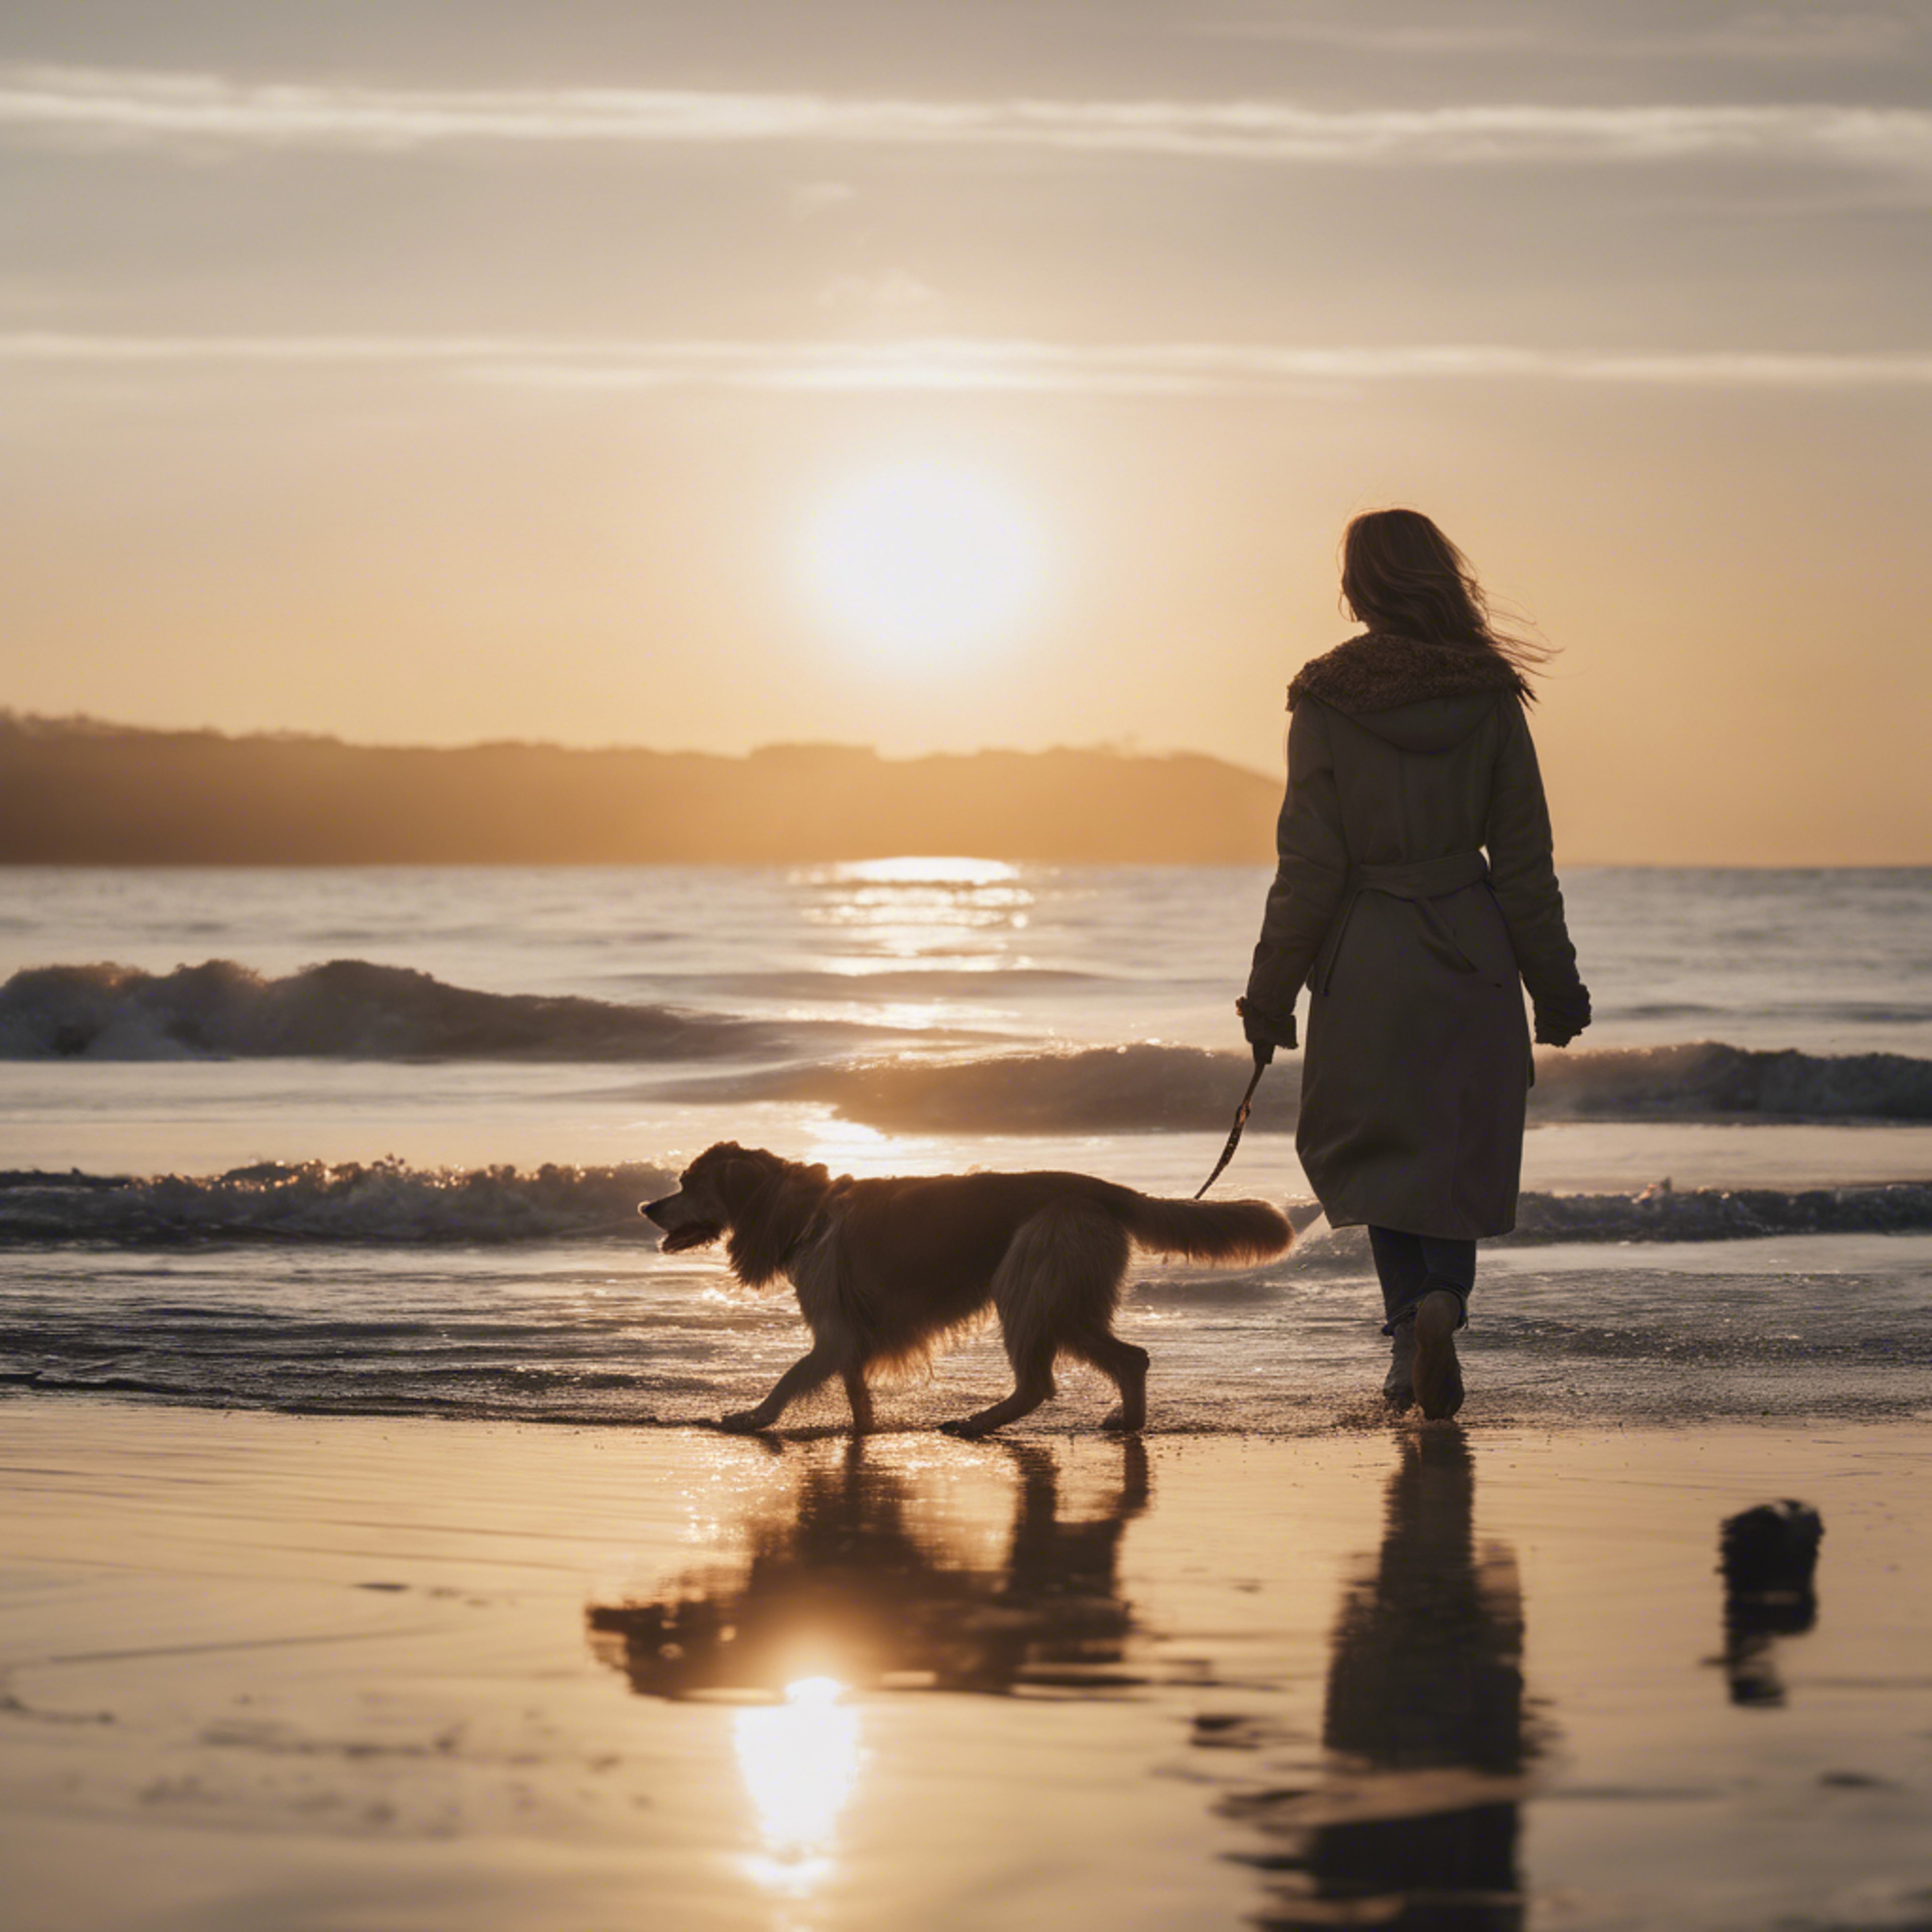 A beach scene with a woman walking her enthusiastic dog along the water's edge at sunset. טפט[f9bc2ab3990f4caba062]